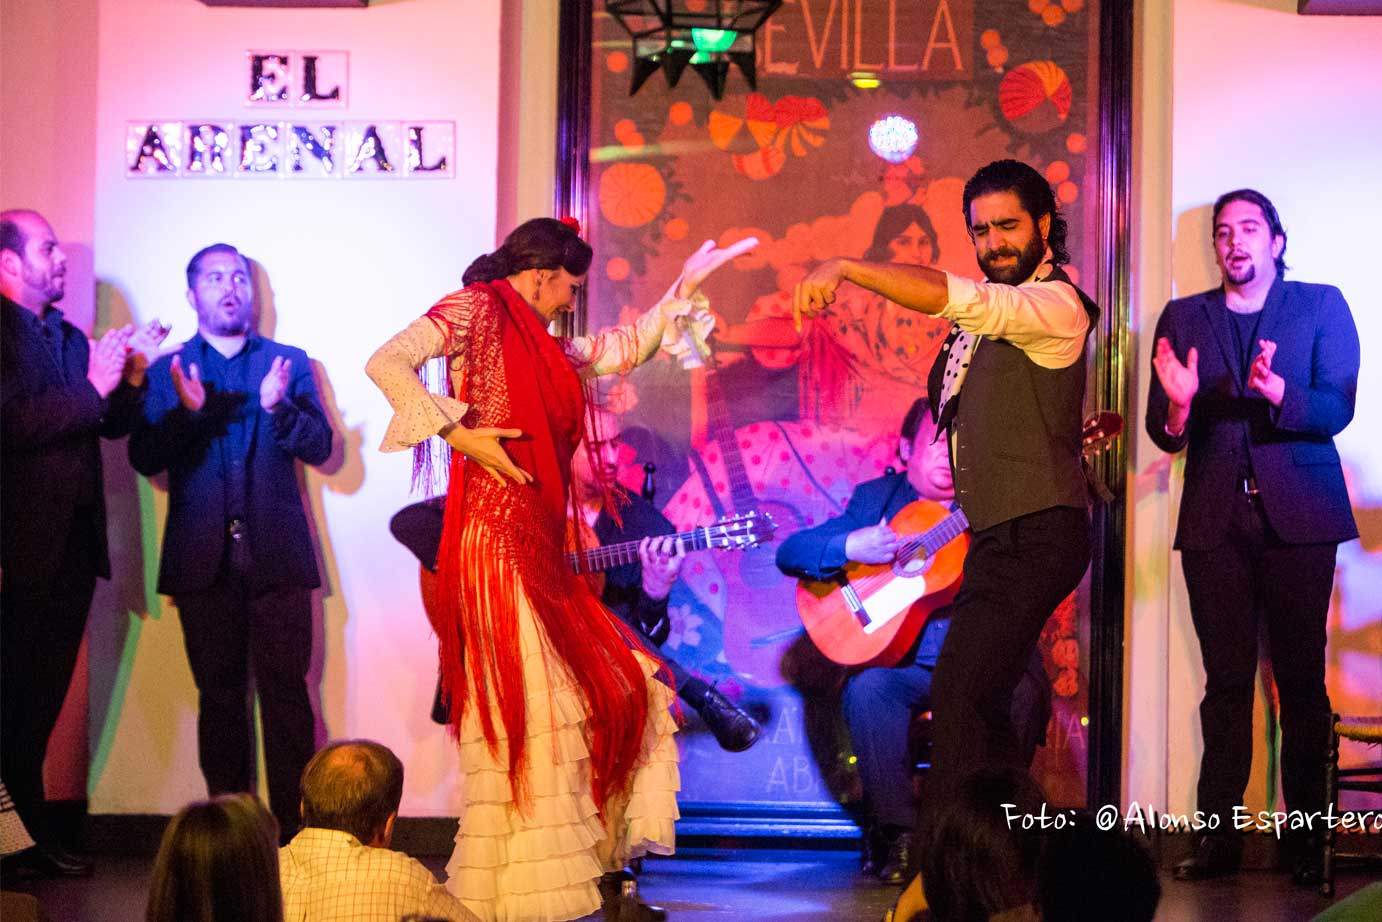 learn about flamenco culture on bespoke tour